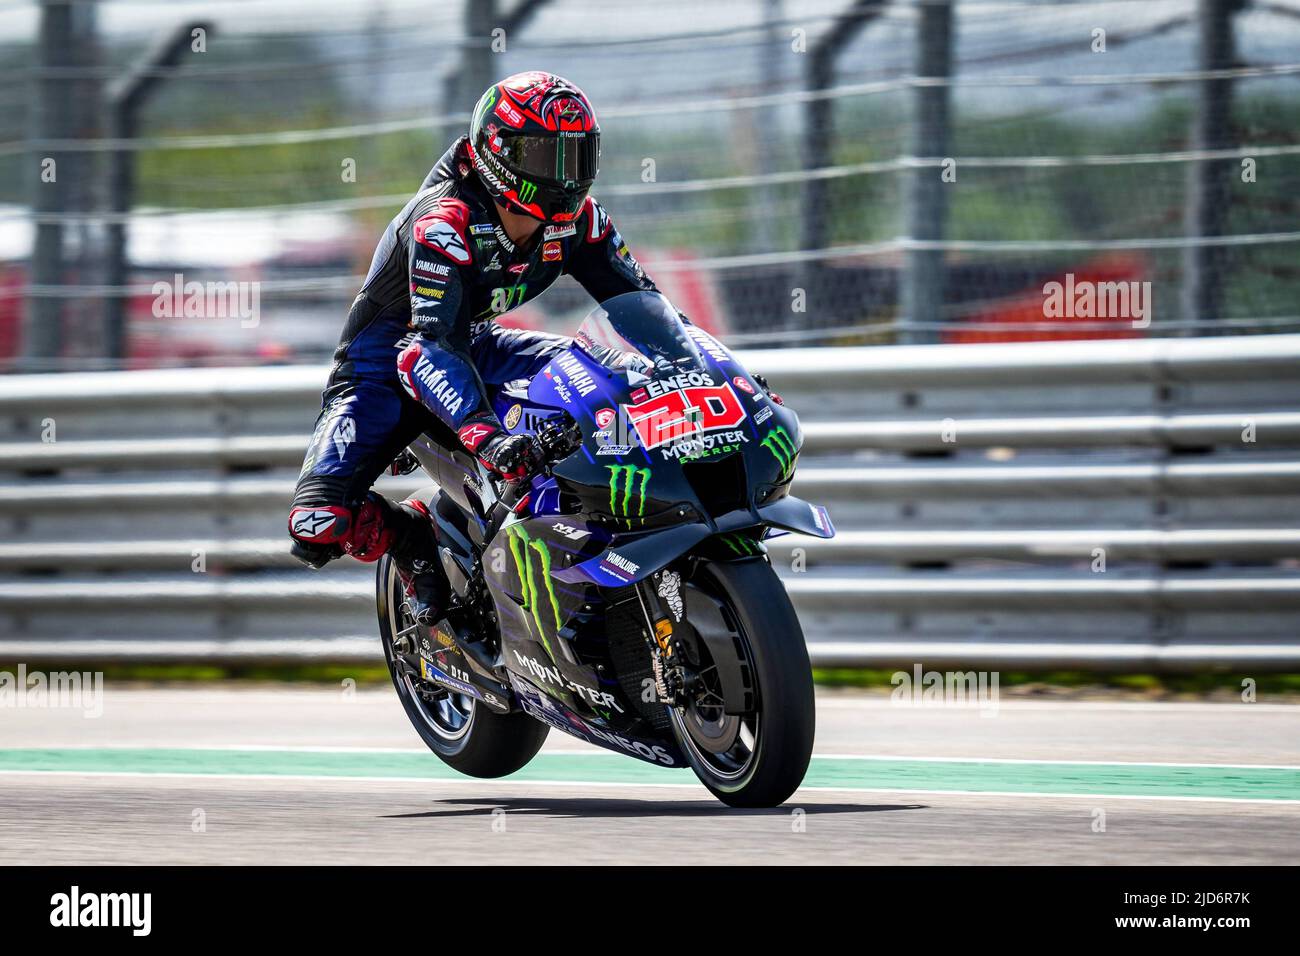 Motogp sachsenring hi-res stock photography and images